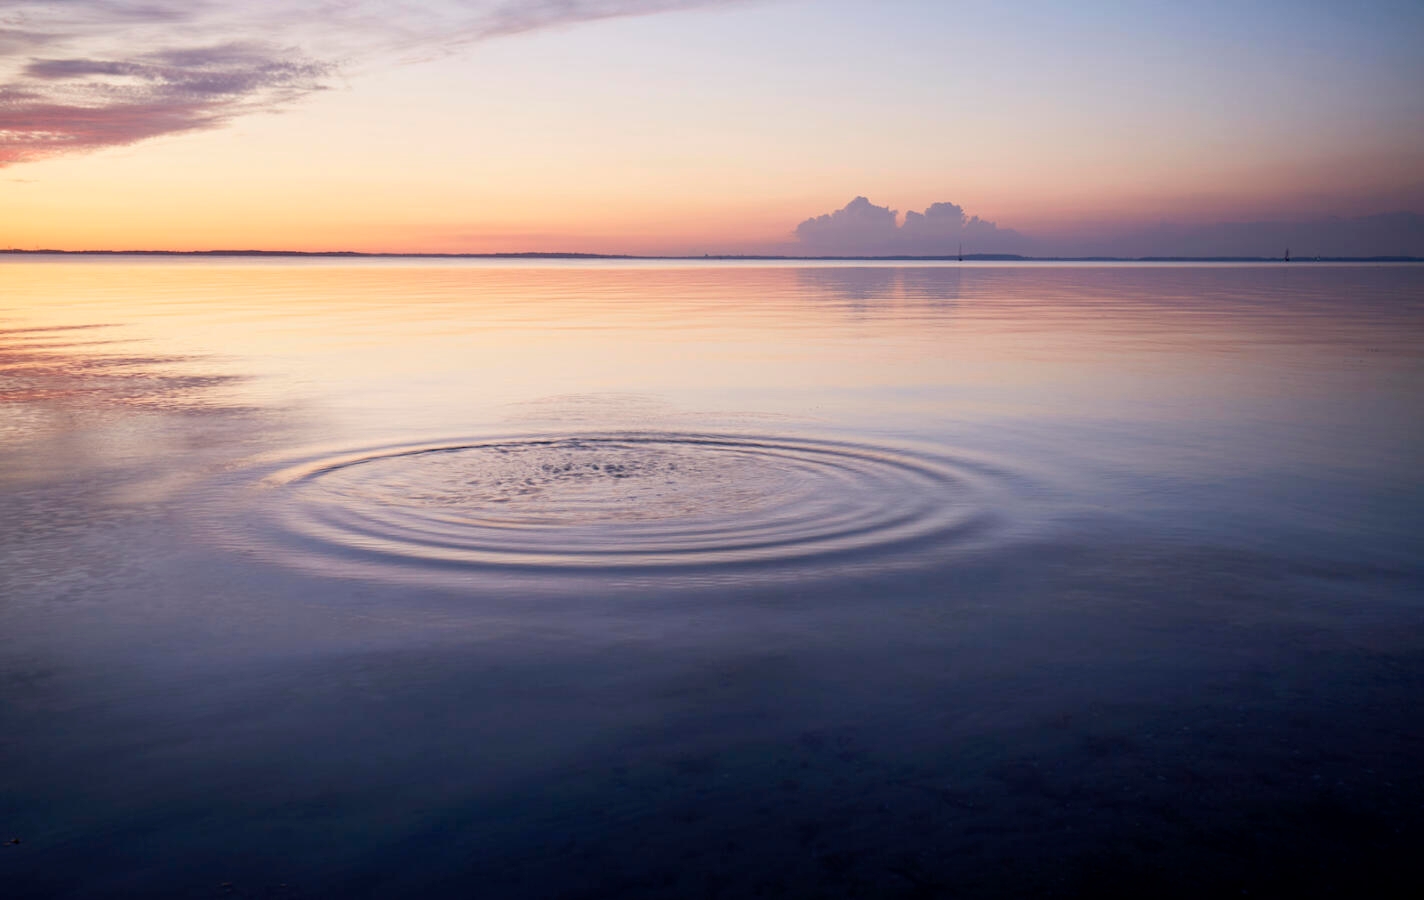 Rings in water of the sea and reflection of the sky during sunset